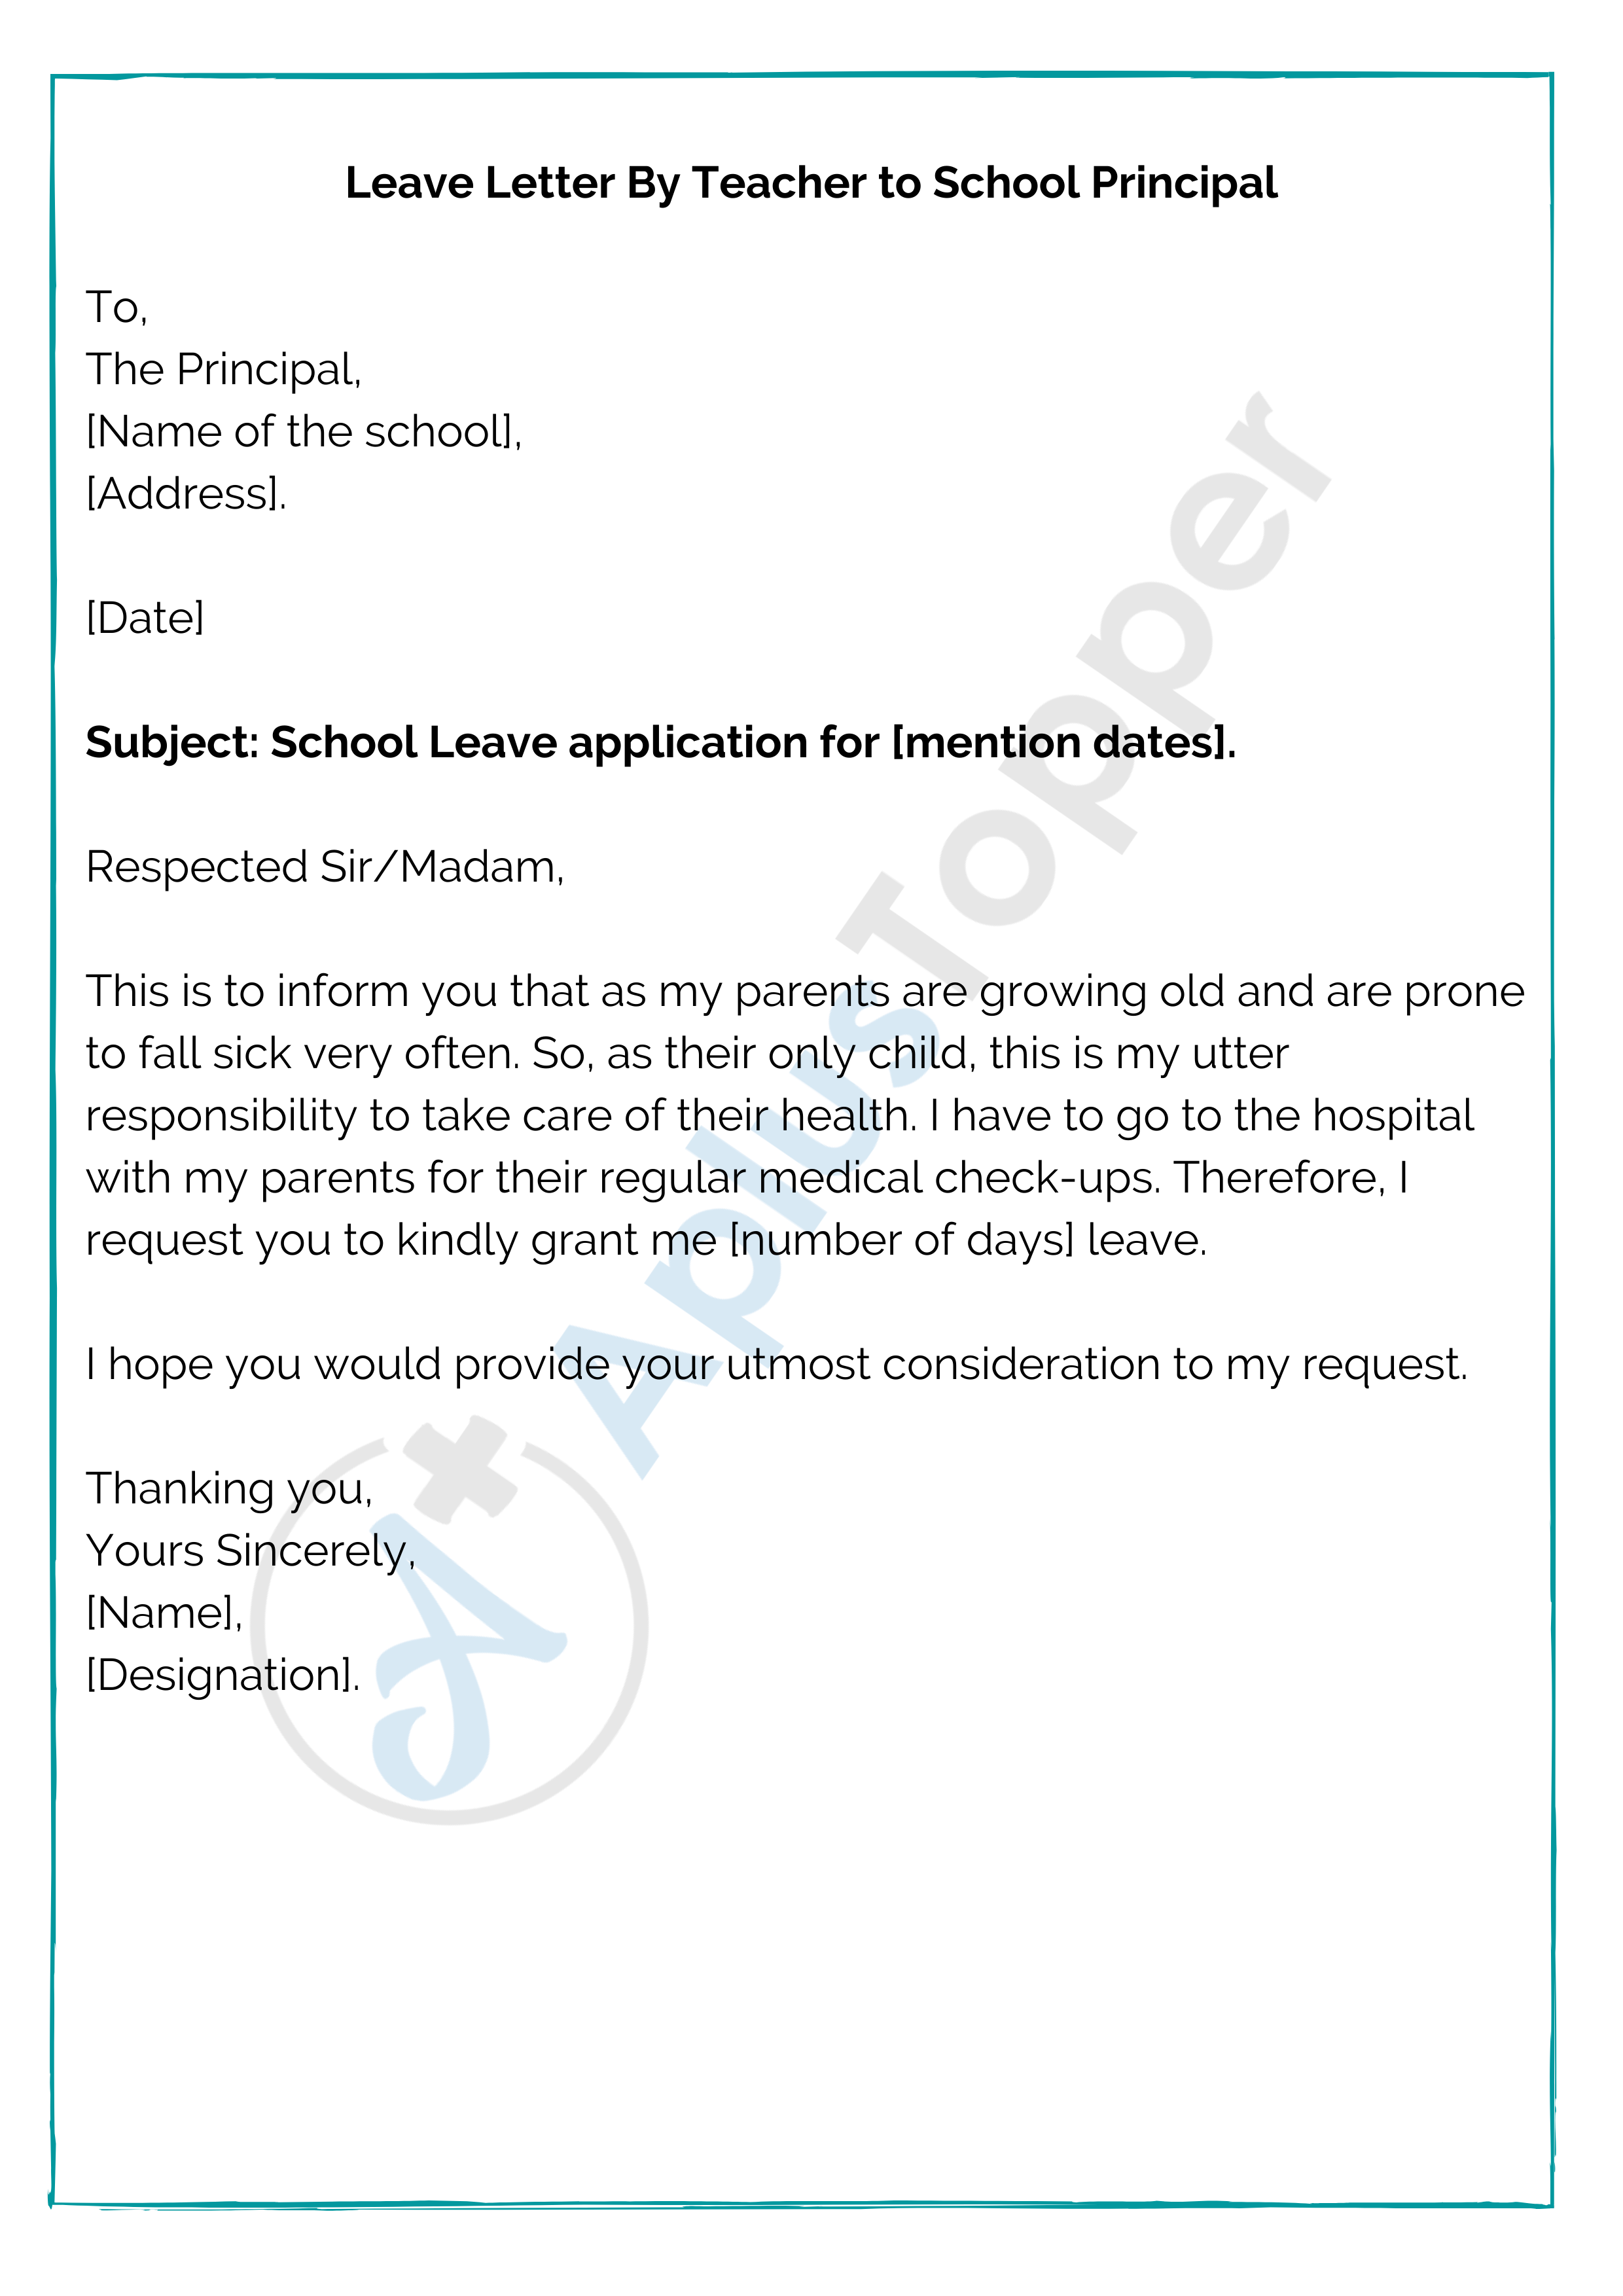 Leave Letter For School How To Write A Leave Application For School Format And Rules A Plus Topper